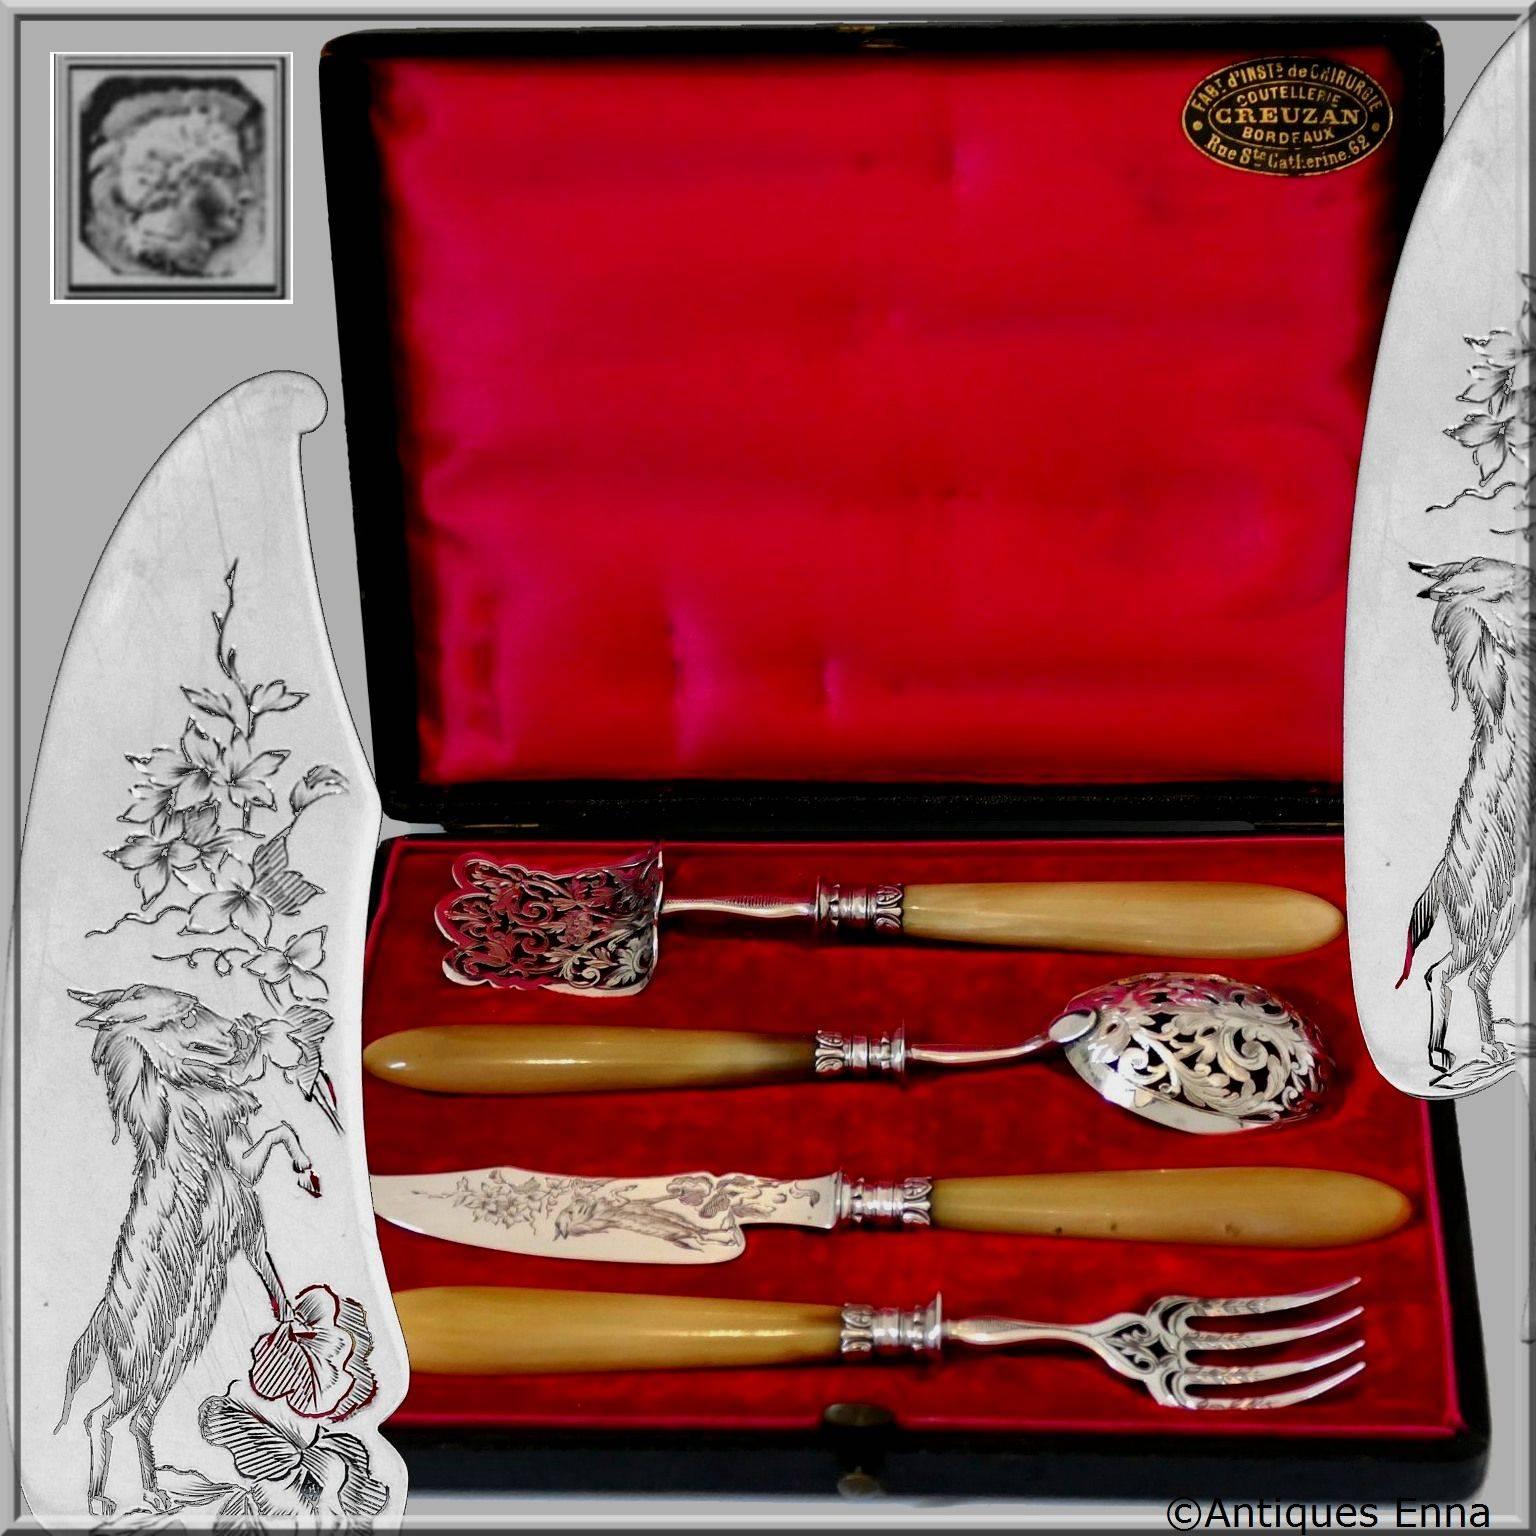 1900s rare French sterling silver and horn dessert Hors D'oeuvre set 4 pc with box.

The sterling silver upper parts are engraved with foliage and chamoix for the knife. Empire, Napoléon 1st style with ferrules decorated with palmettes. The set